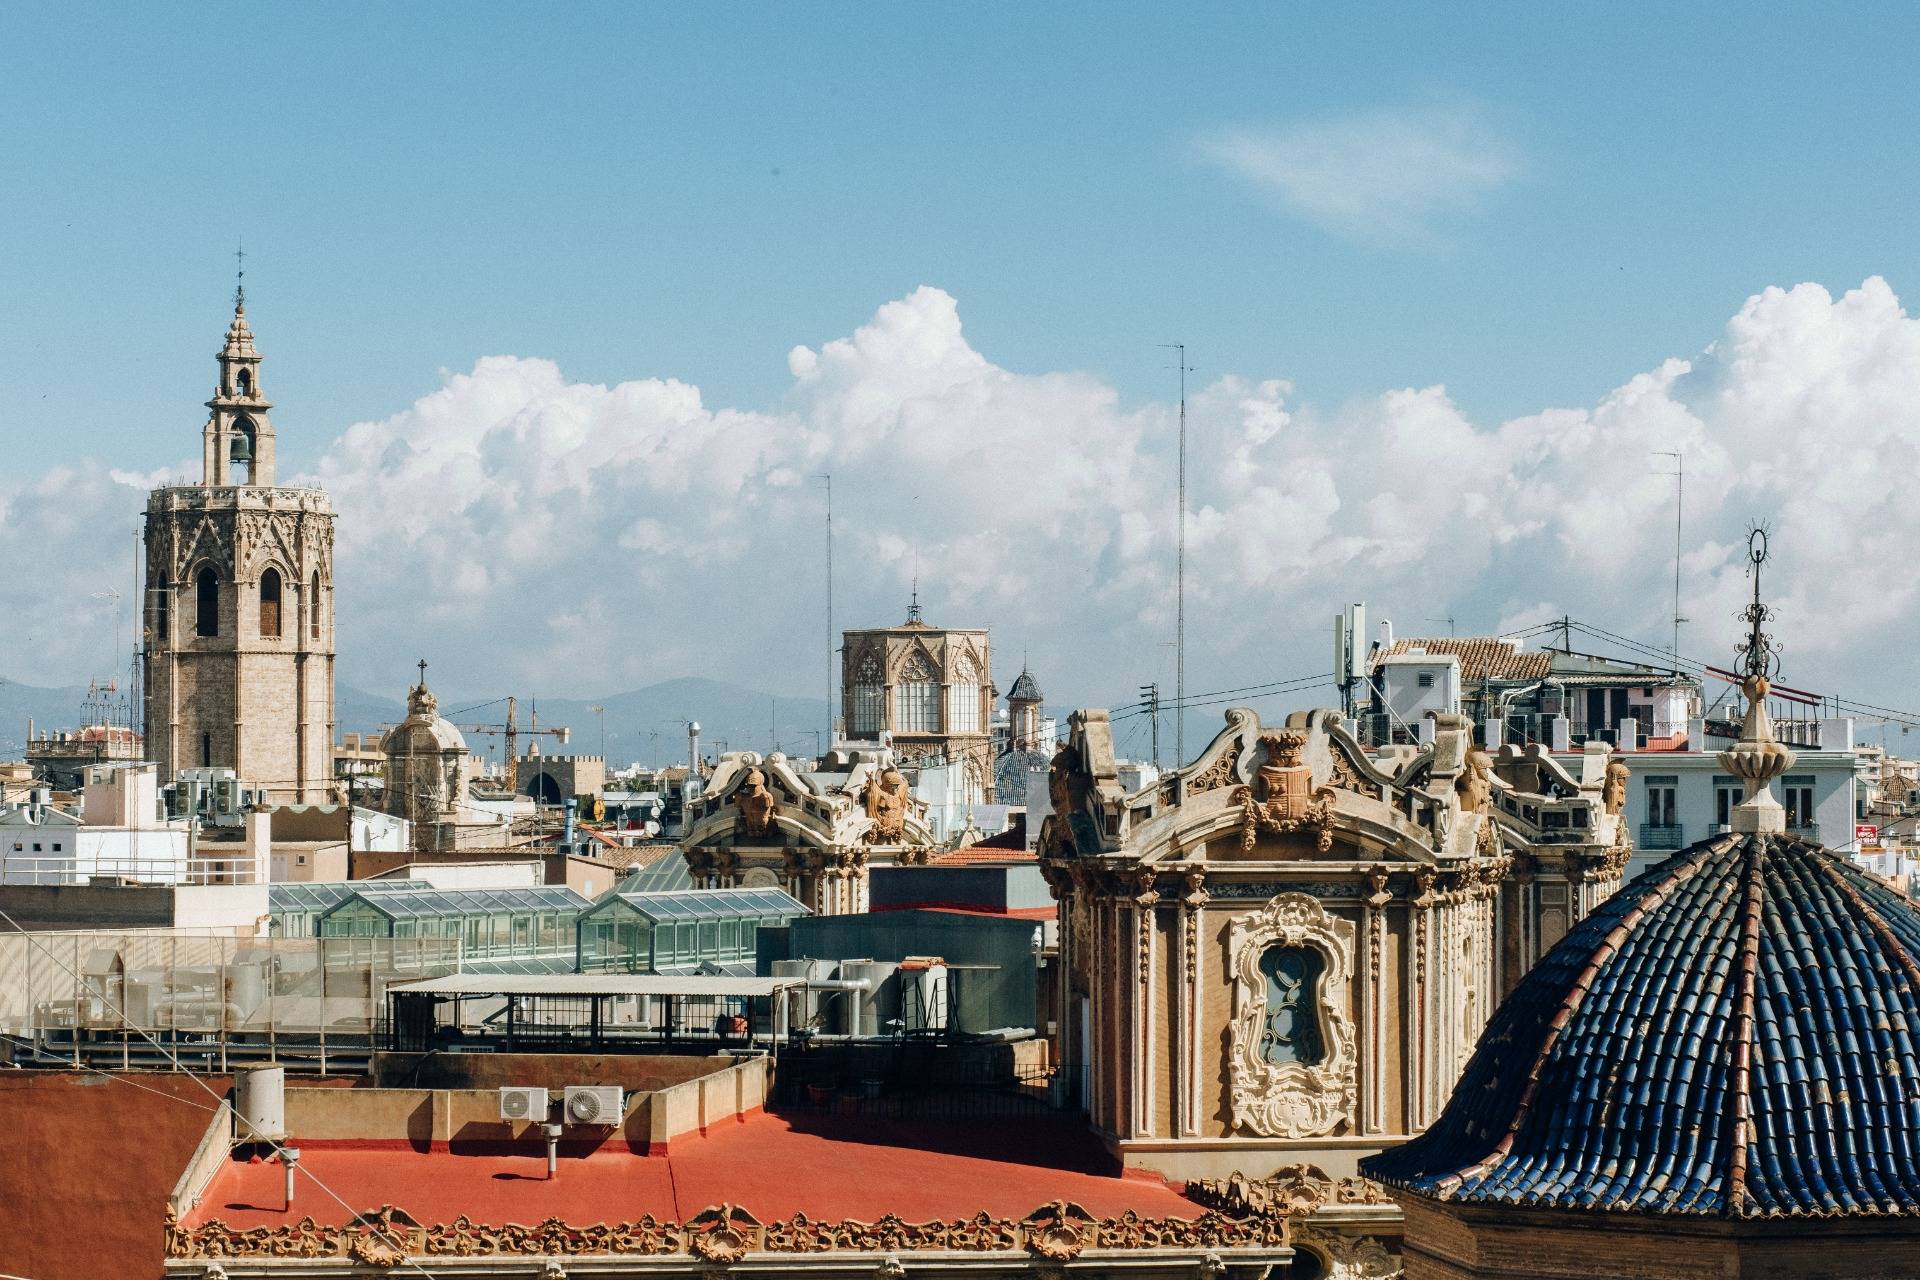 Valencia: A blend of history and modernity